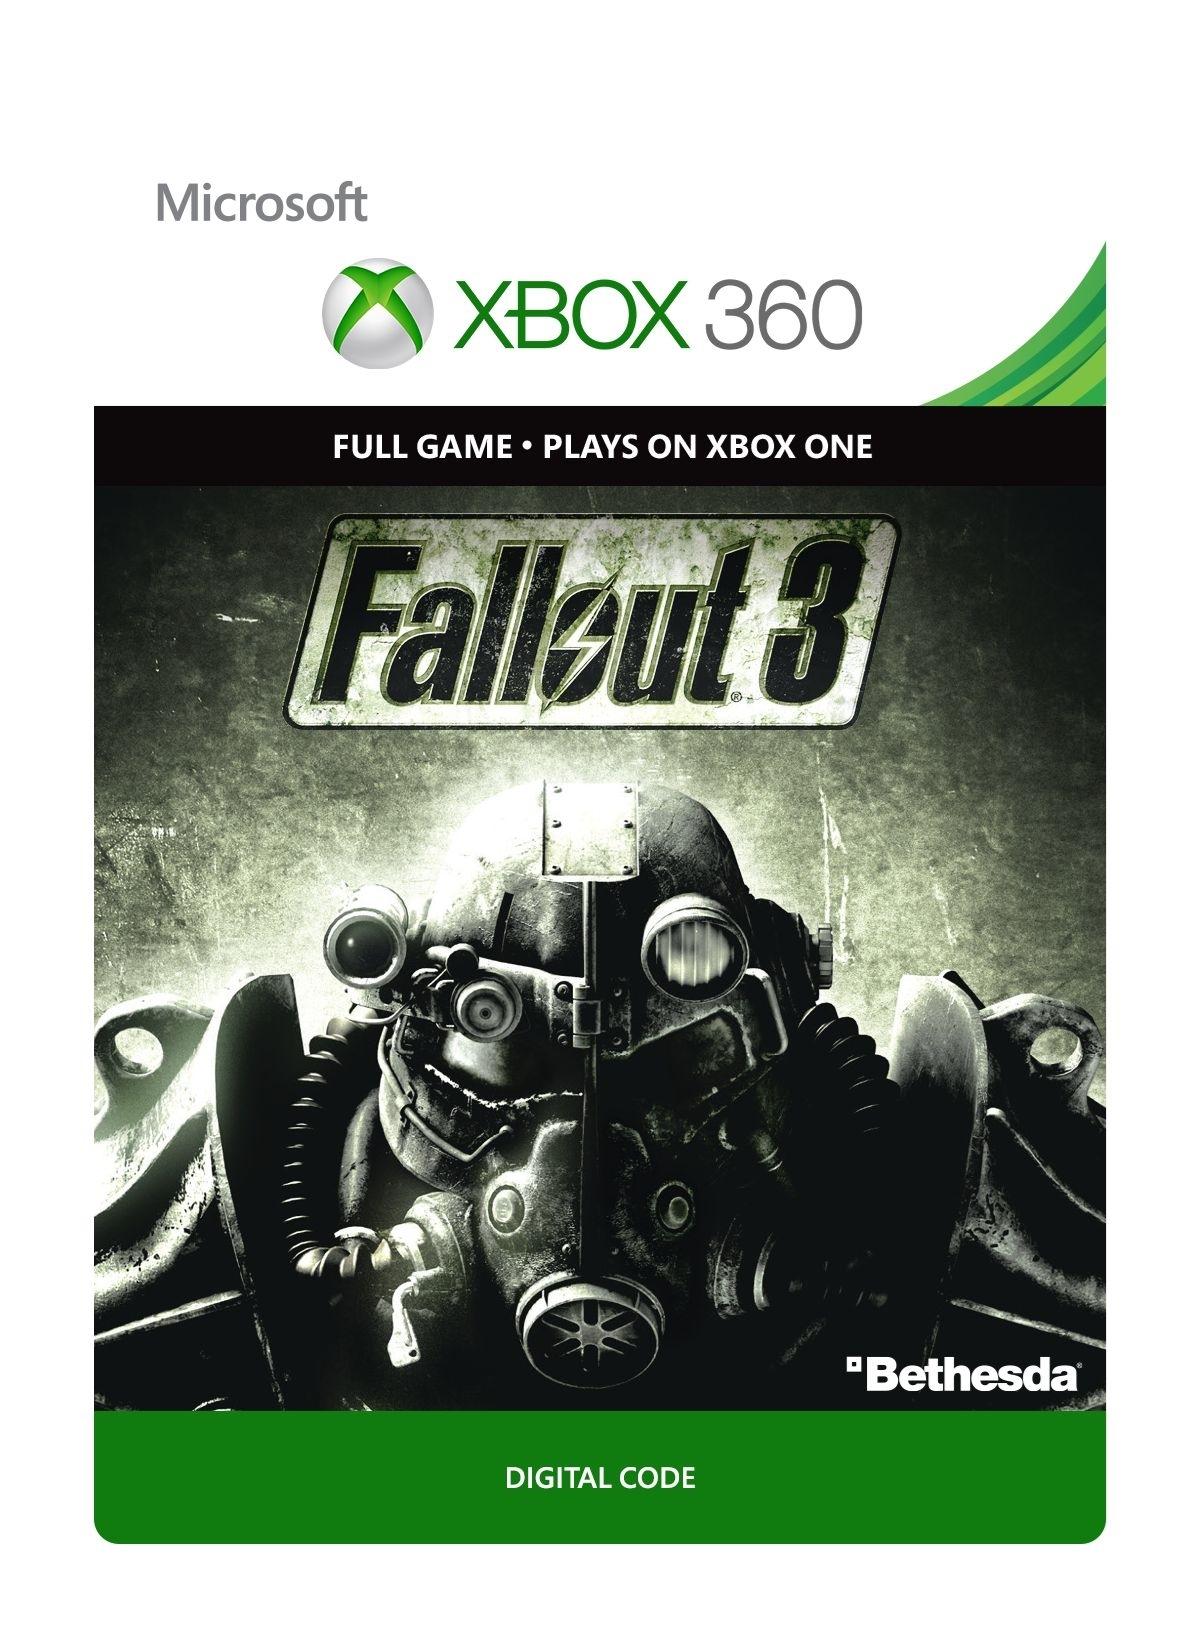 Fallout 3 - Xbox 360 - Plays on Xbox One - Full Game | G3P-00096 (110d2201-fd7f-4ed7-aa32-508009bf7768)